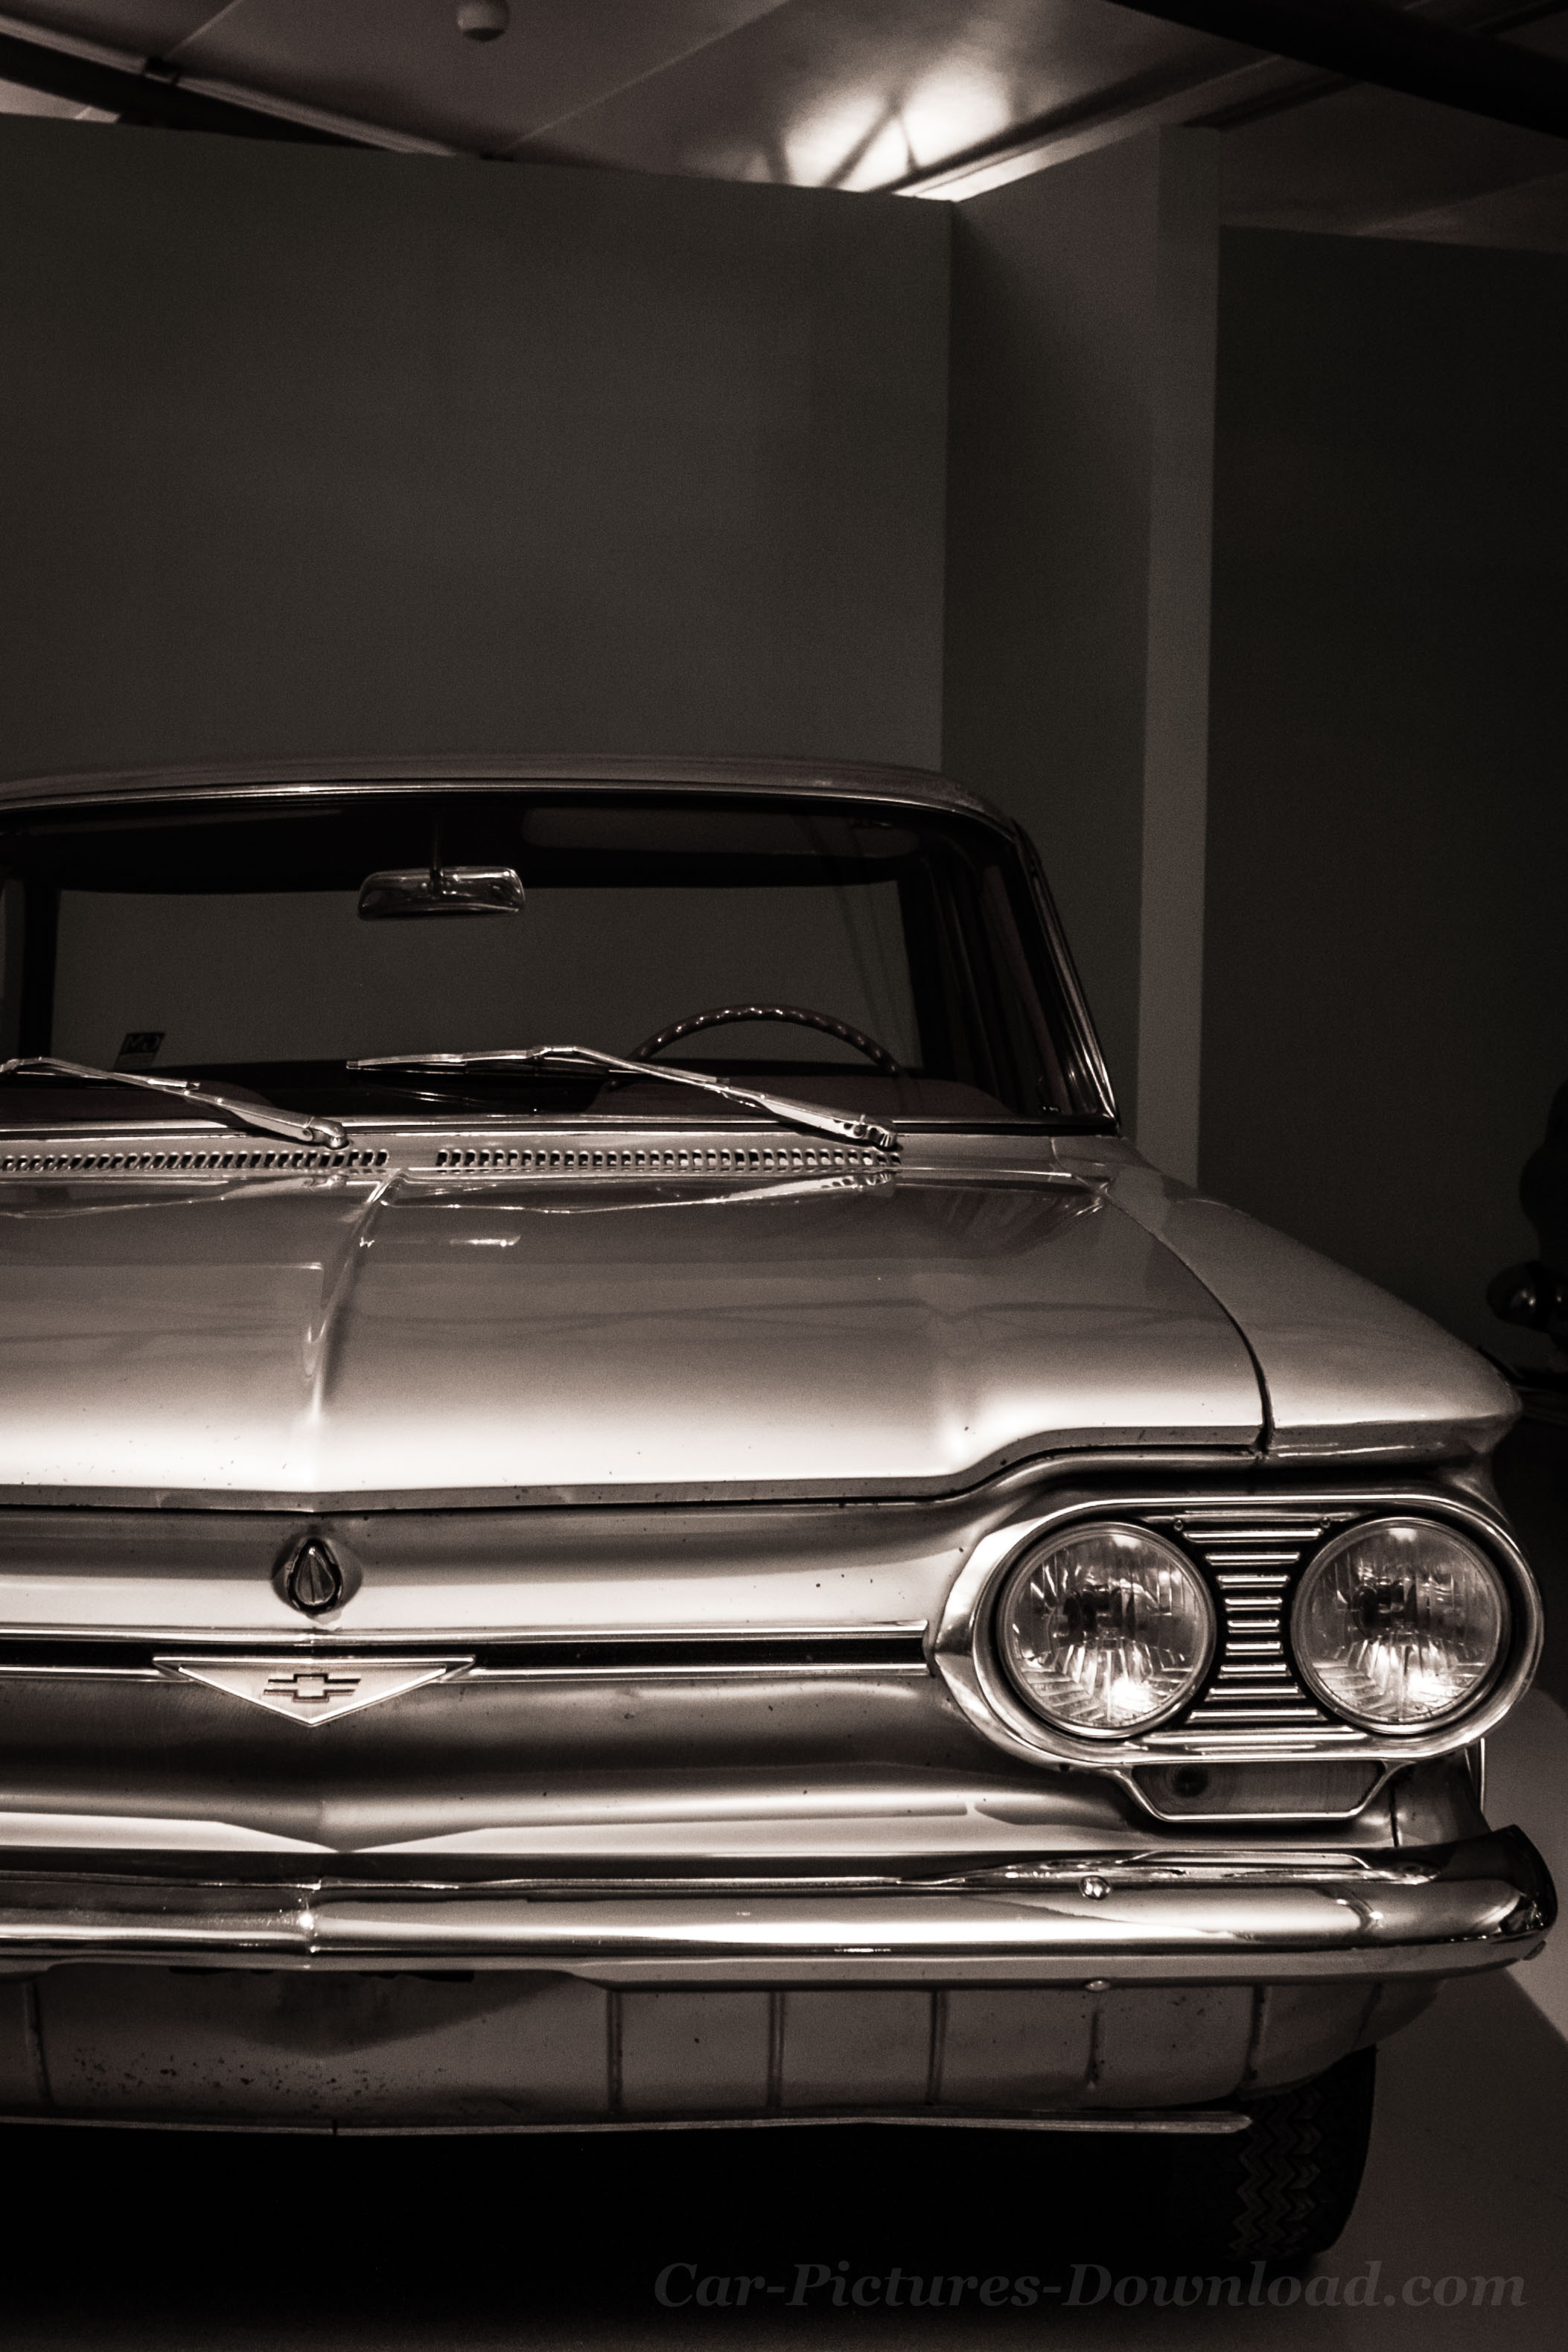 Chevy Cell Phone Wallpaper - Antique Car , HD Wallpaper & Backgrounds